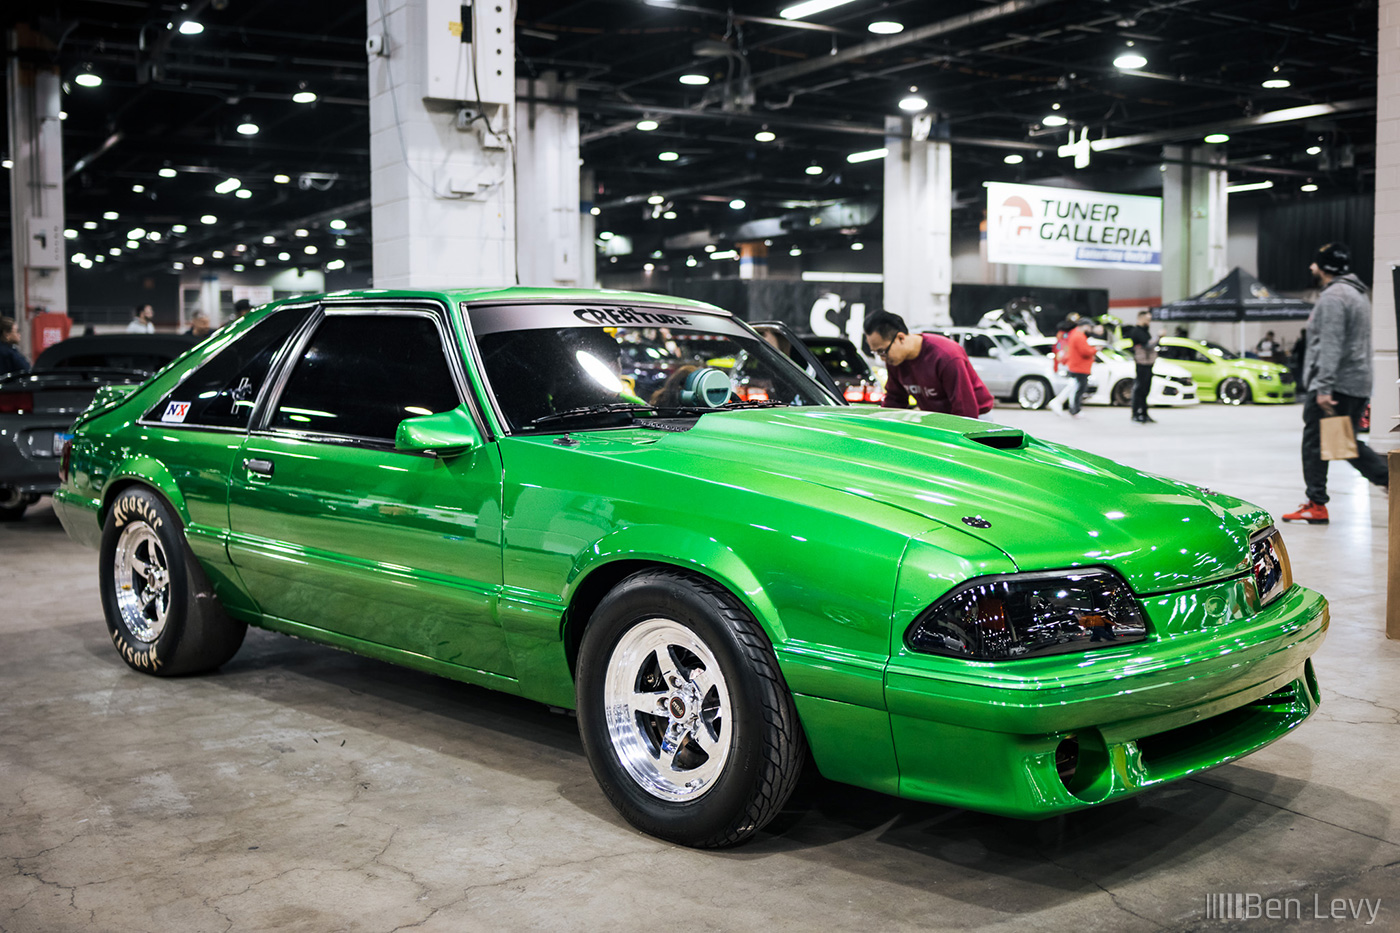 The Creature, Green Foxbody Mustang